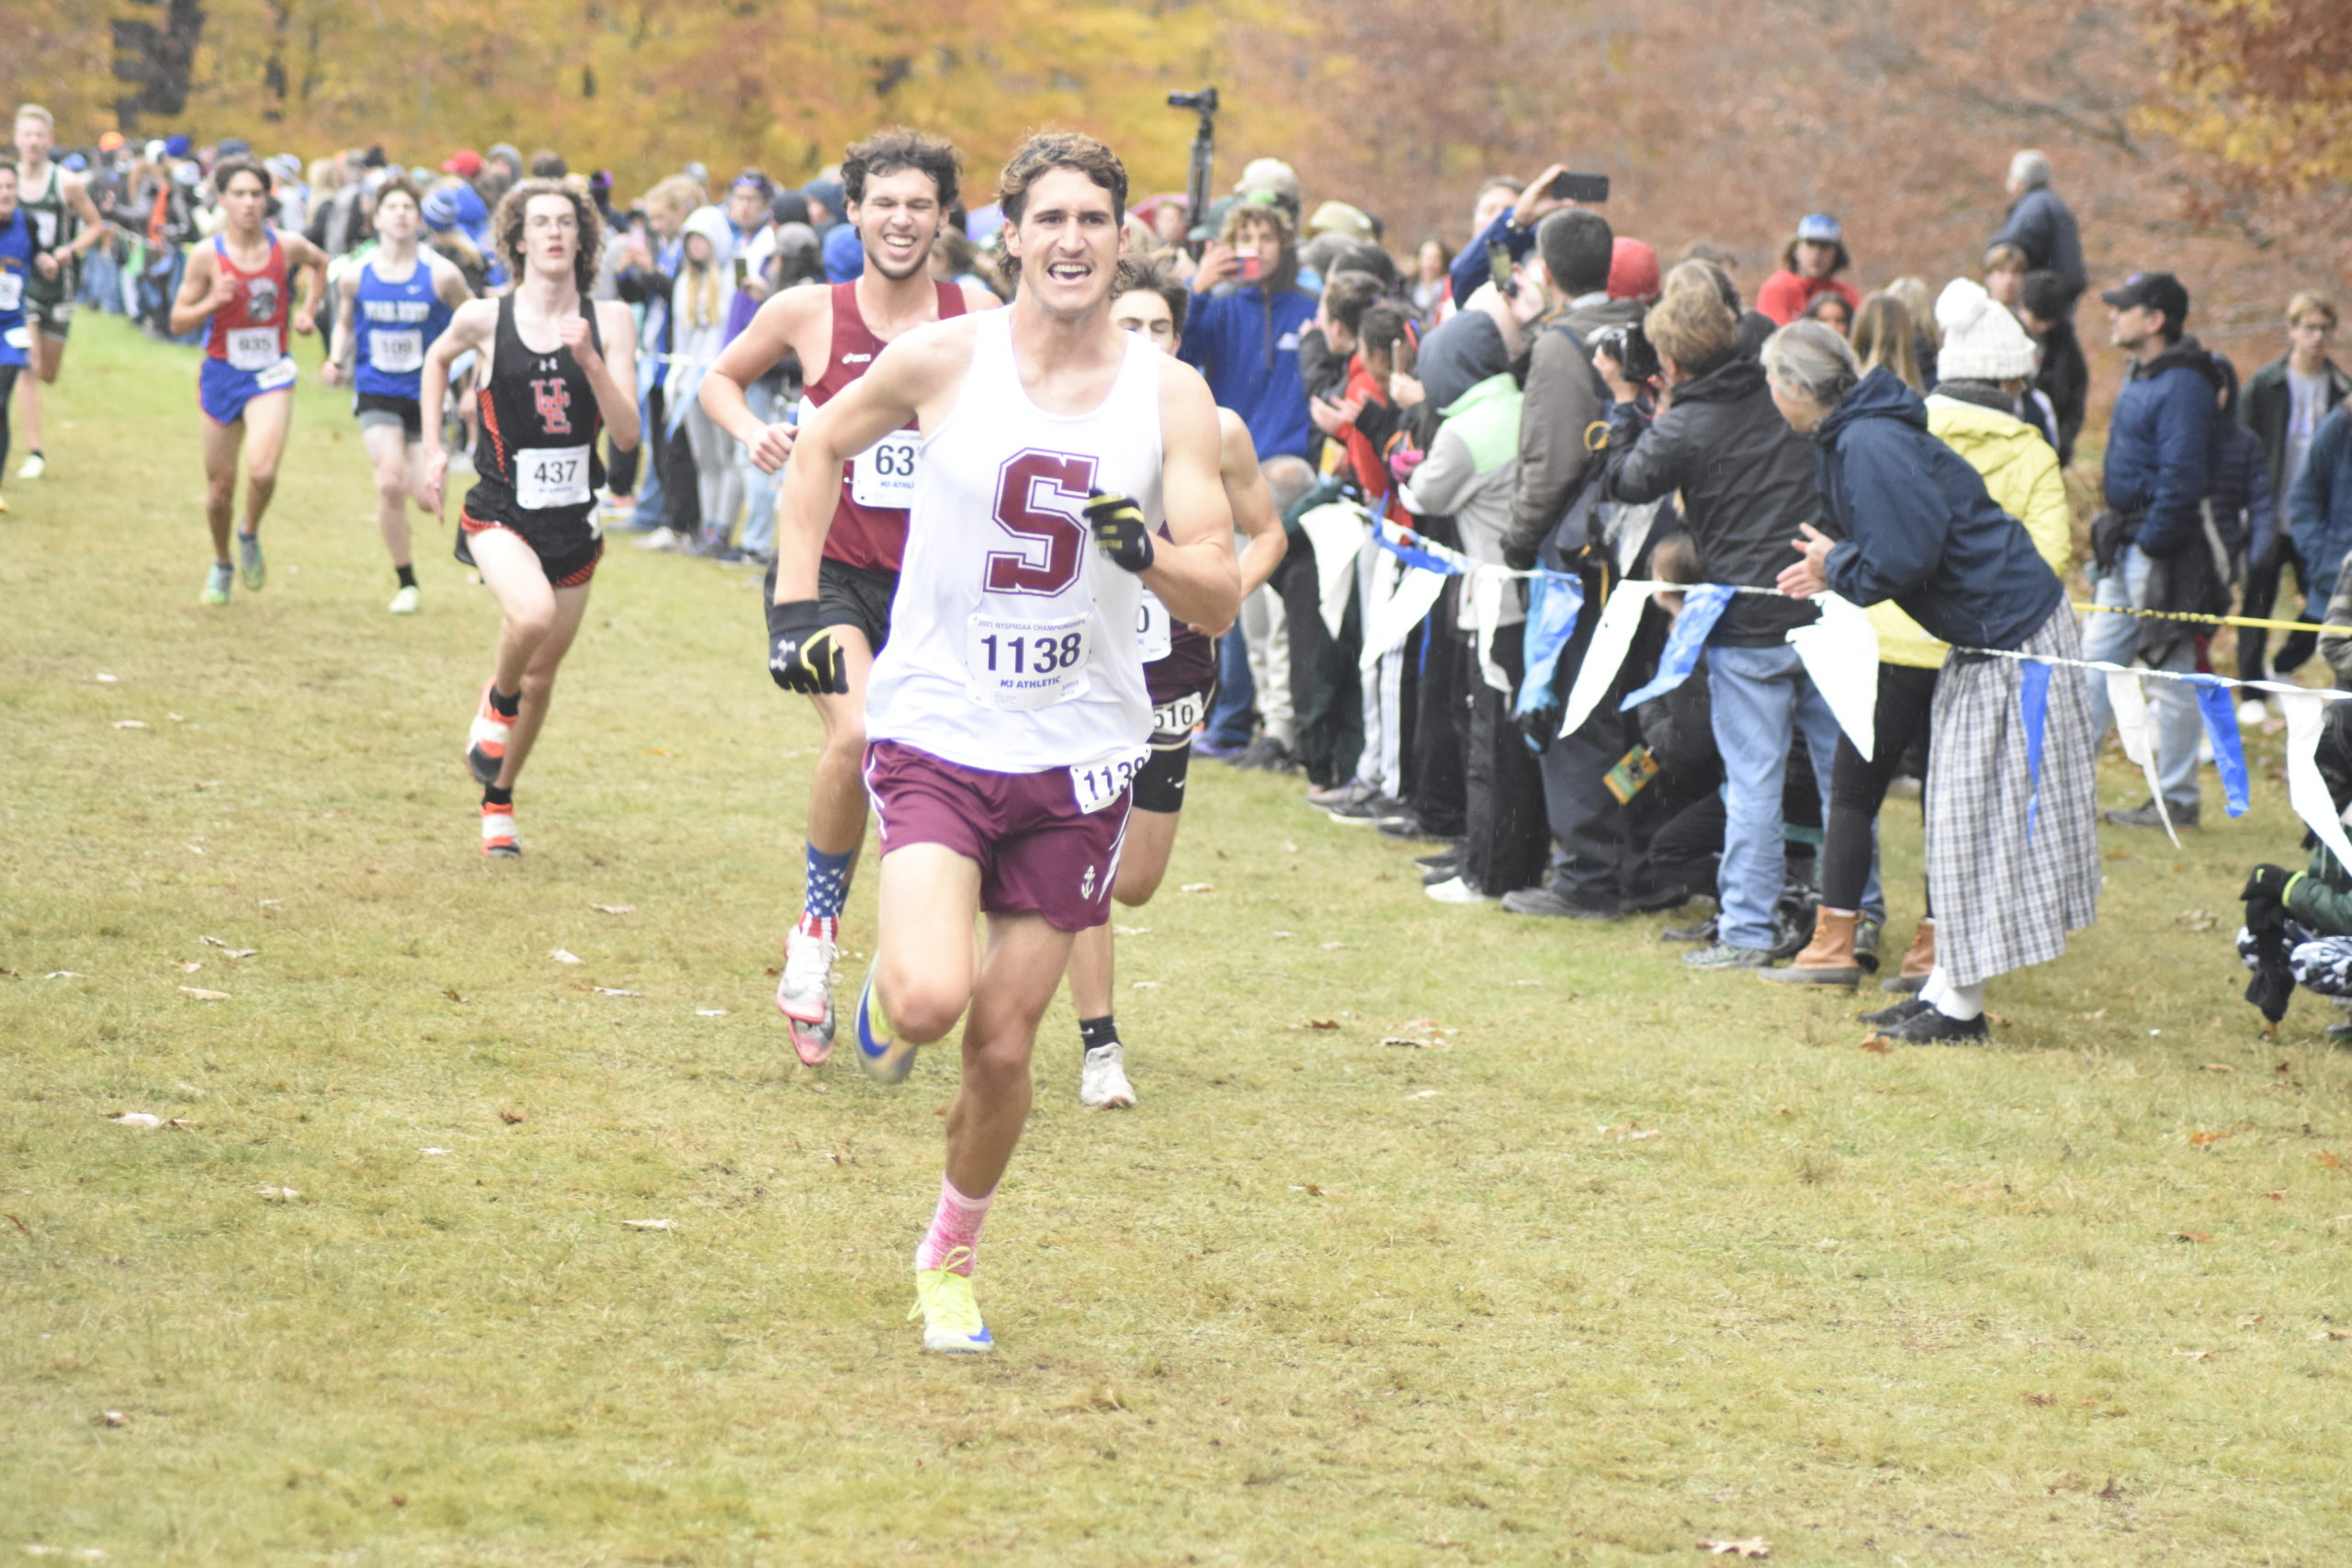 Southampton's Billy Malone finished his cross country career at the state meet.